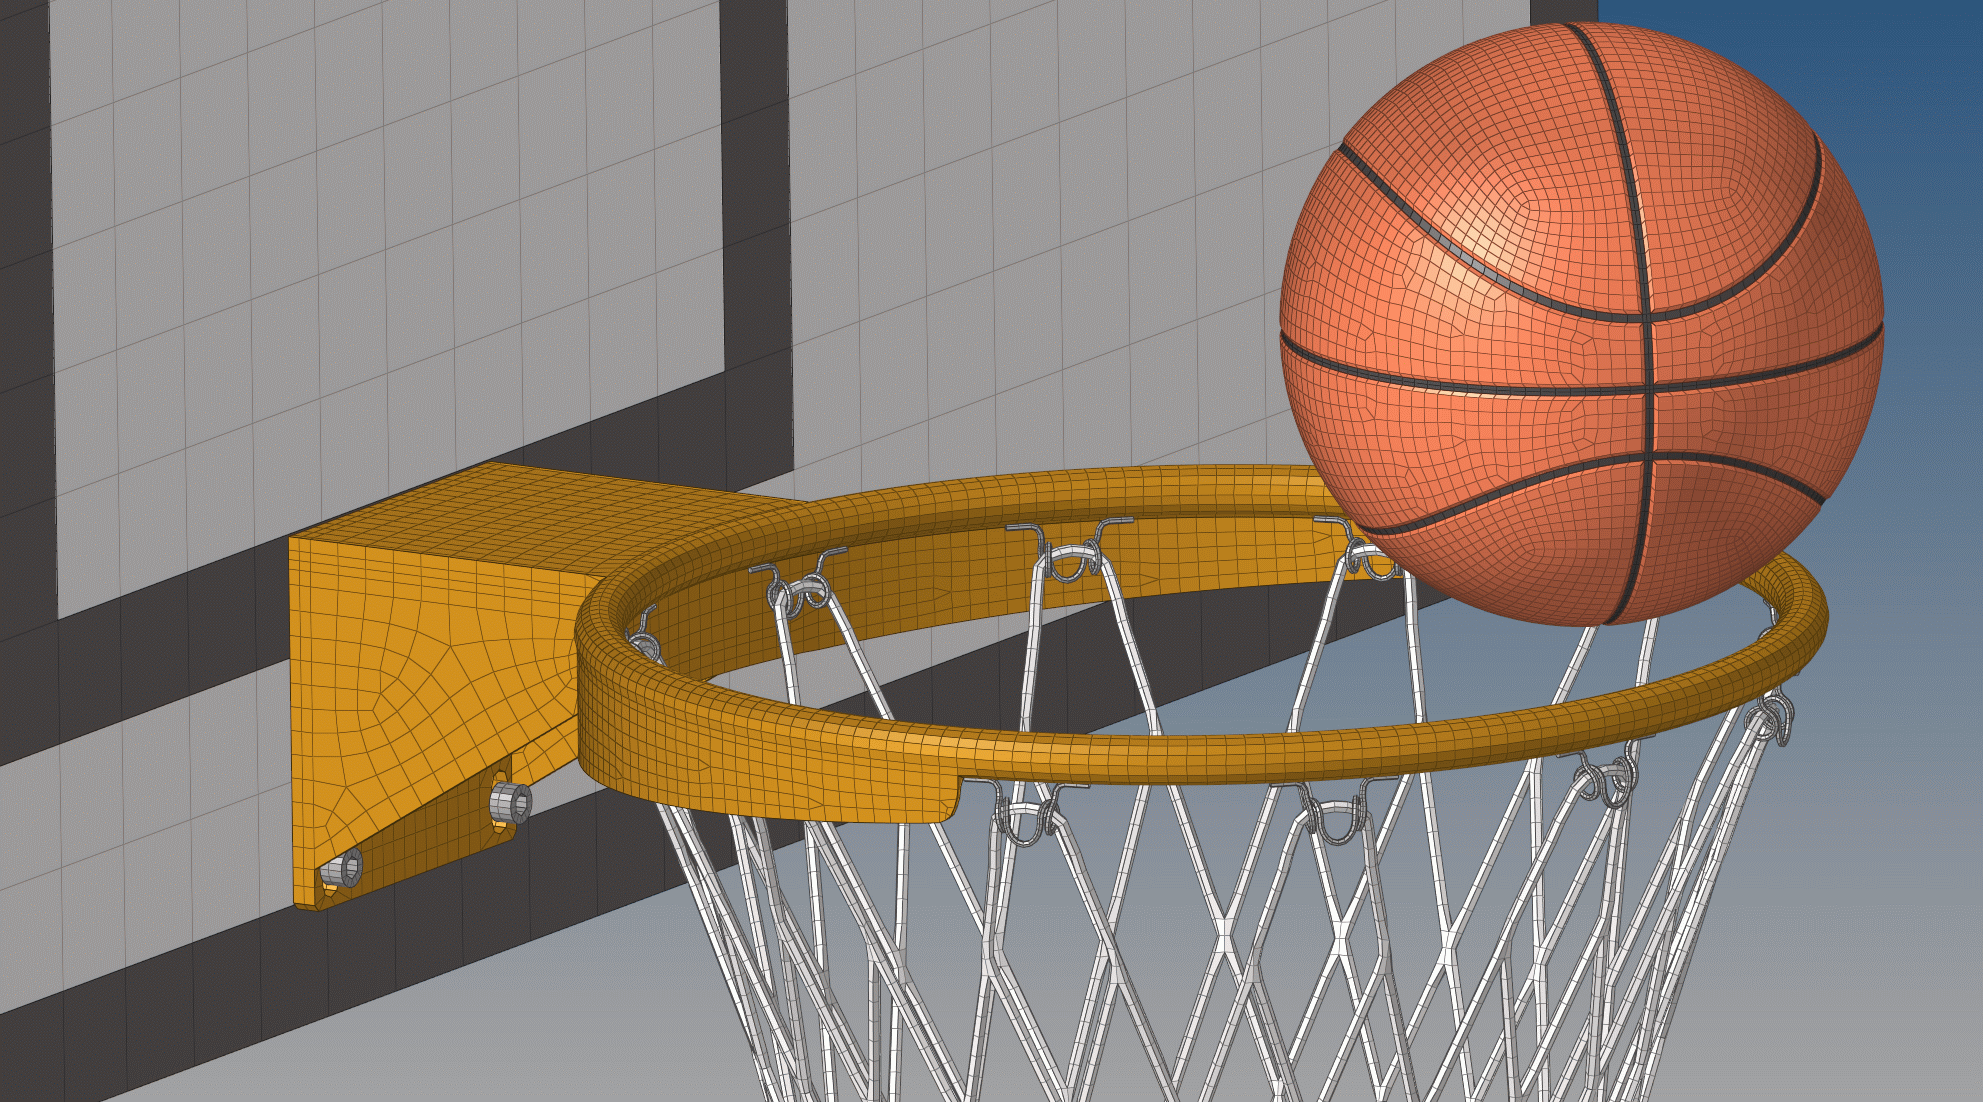 Modeling March Madness: Simulating a 3-Point Shot